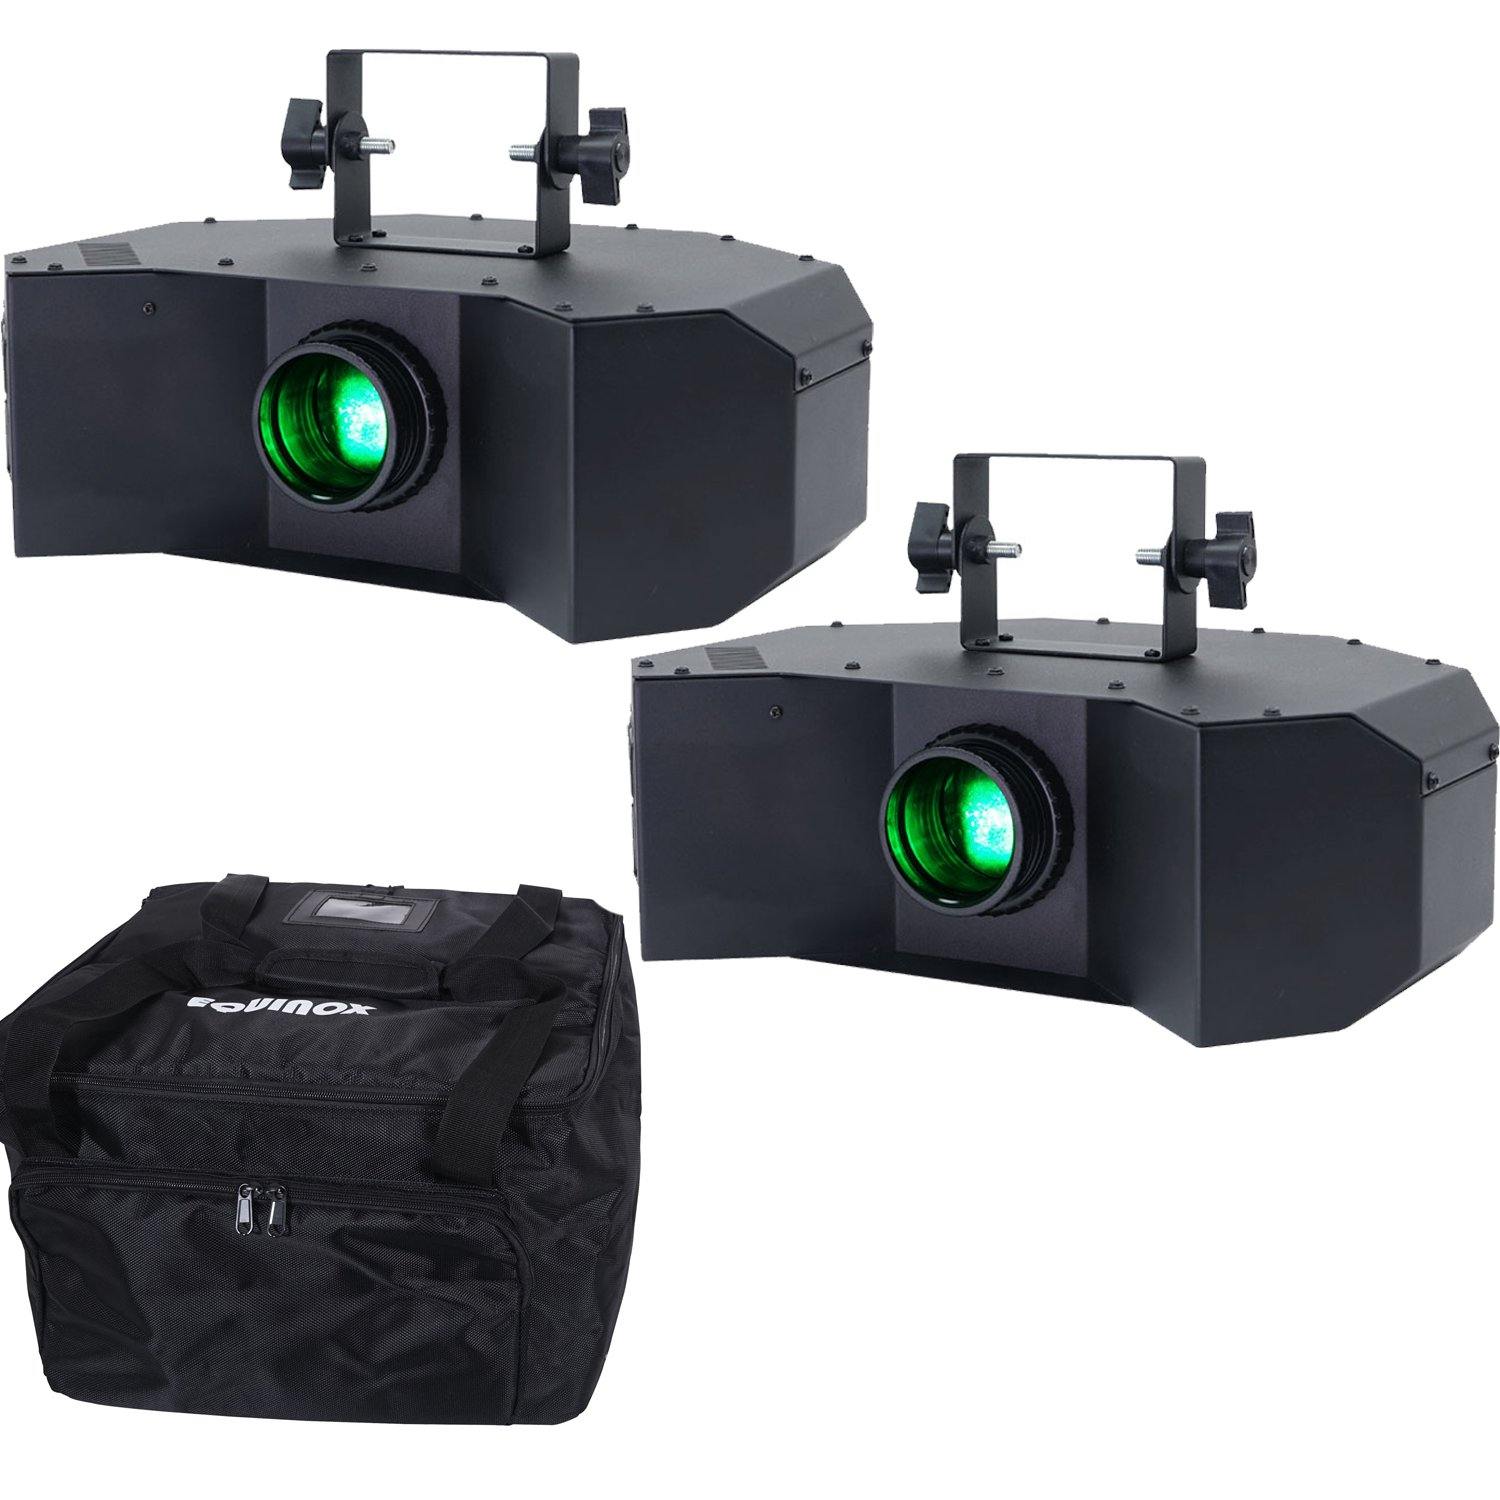 2 x Equinox Helix Gobo Flower Black with Carry Bag - DY Pro Audio